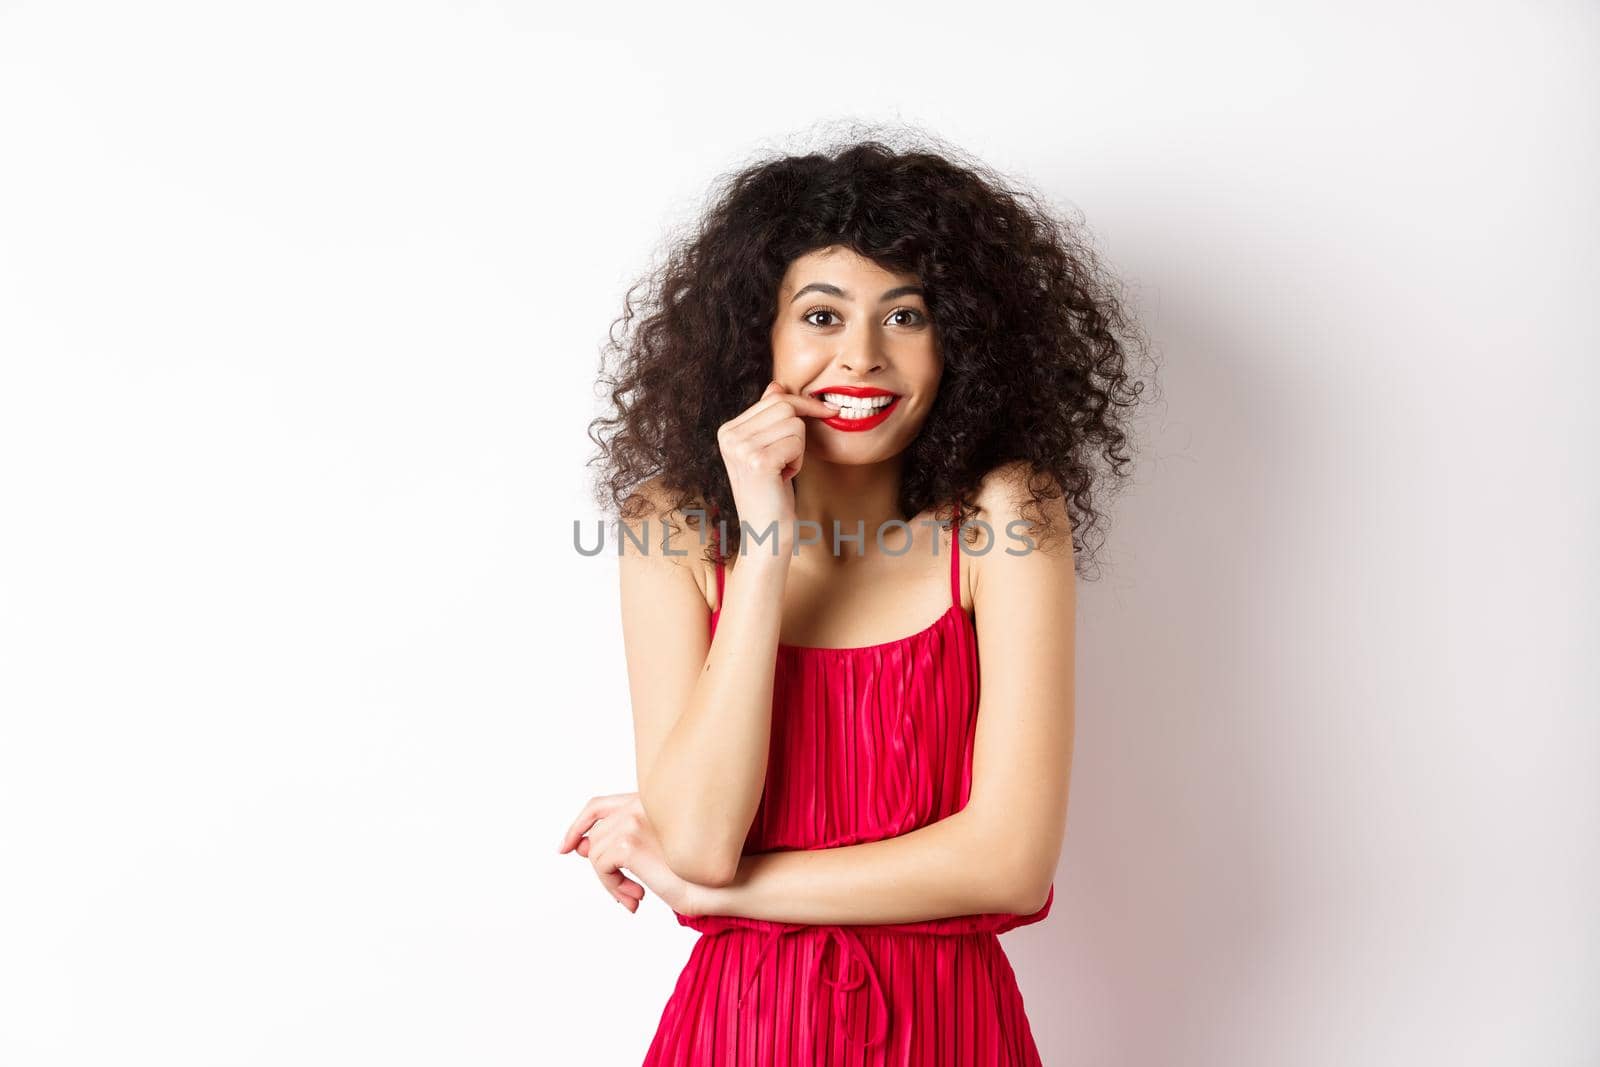 Intrigued young woman with curly hair, wearing elegant red dress and lipstick, biting fingernails and looking interested, standing over white background.